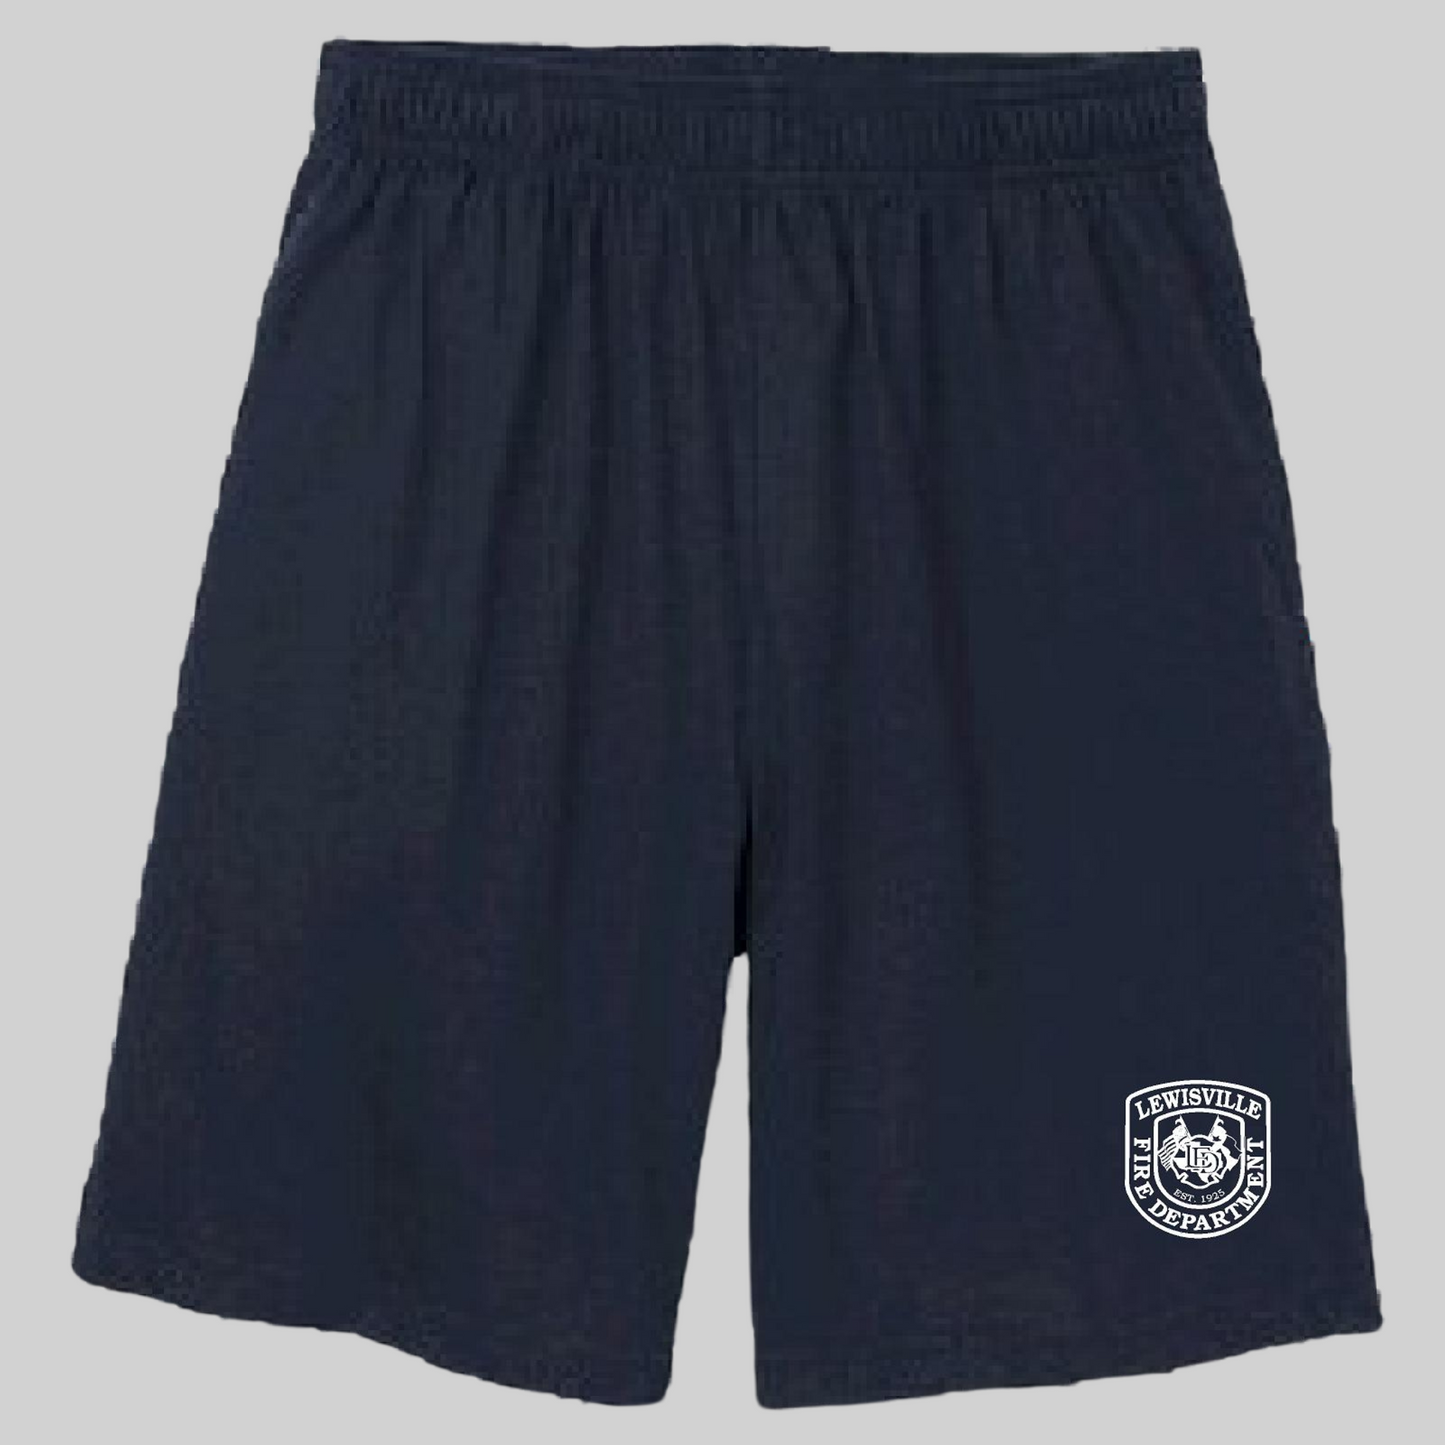 LFD Local 3606 Firefighters Association Members Shorts